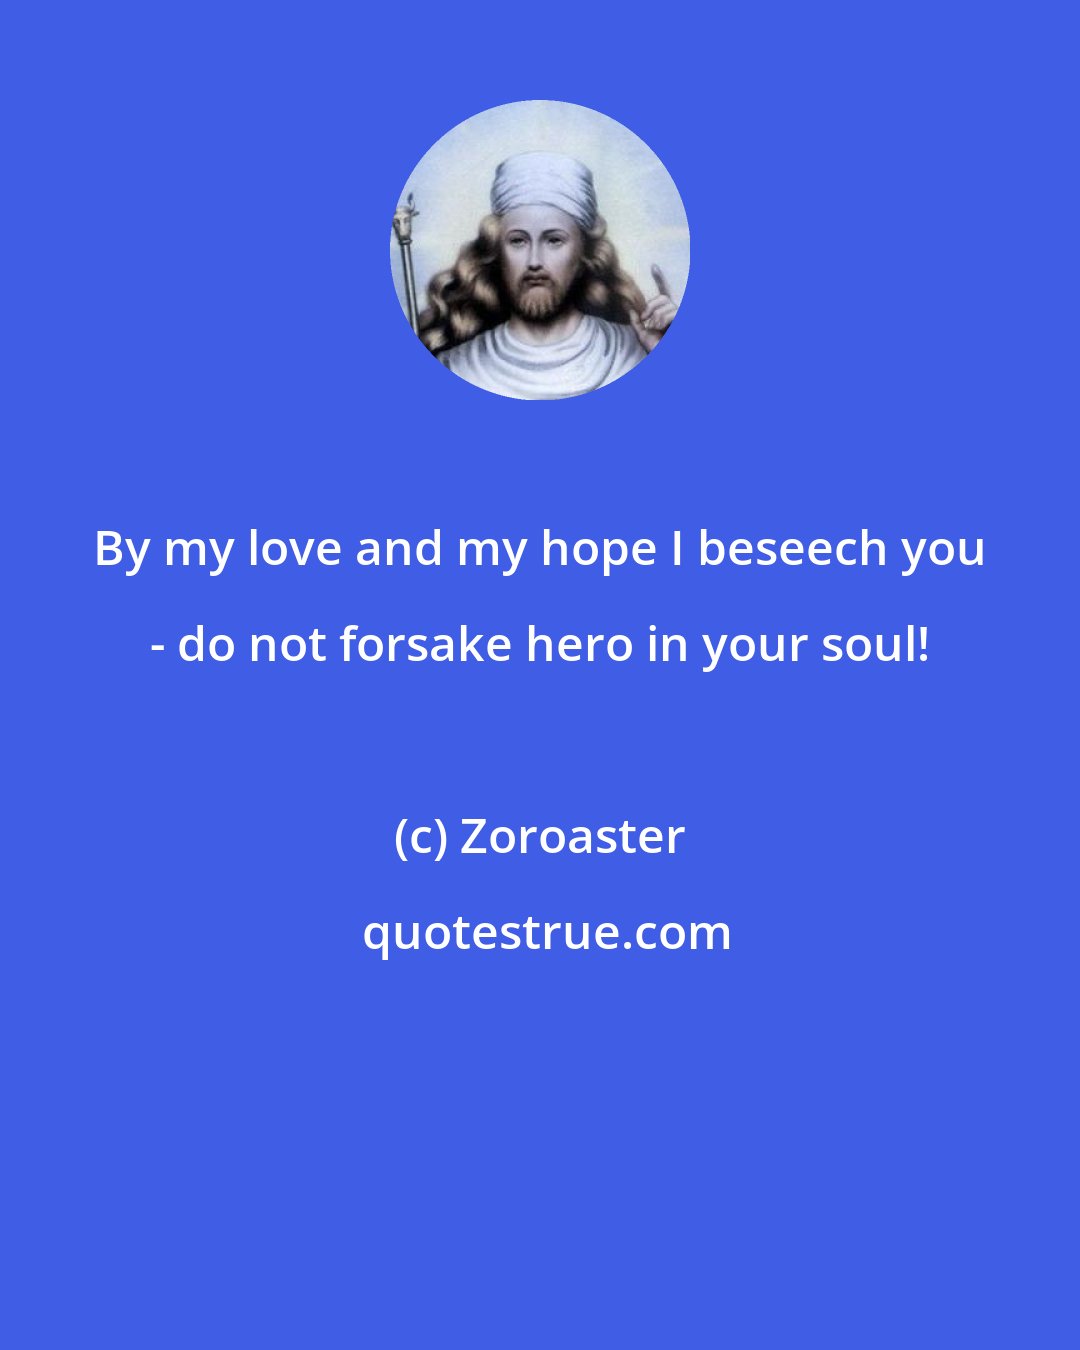 Zoroaster: By my love and my hope I beseech you - do not forsake hero in your soul!